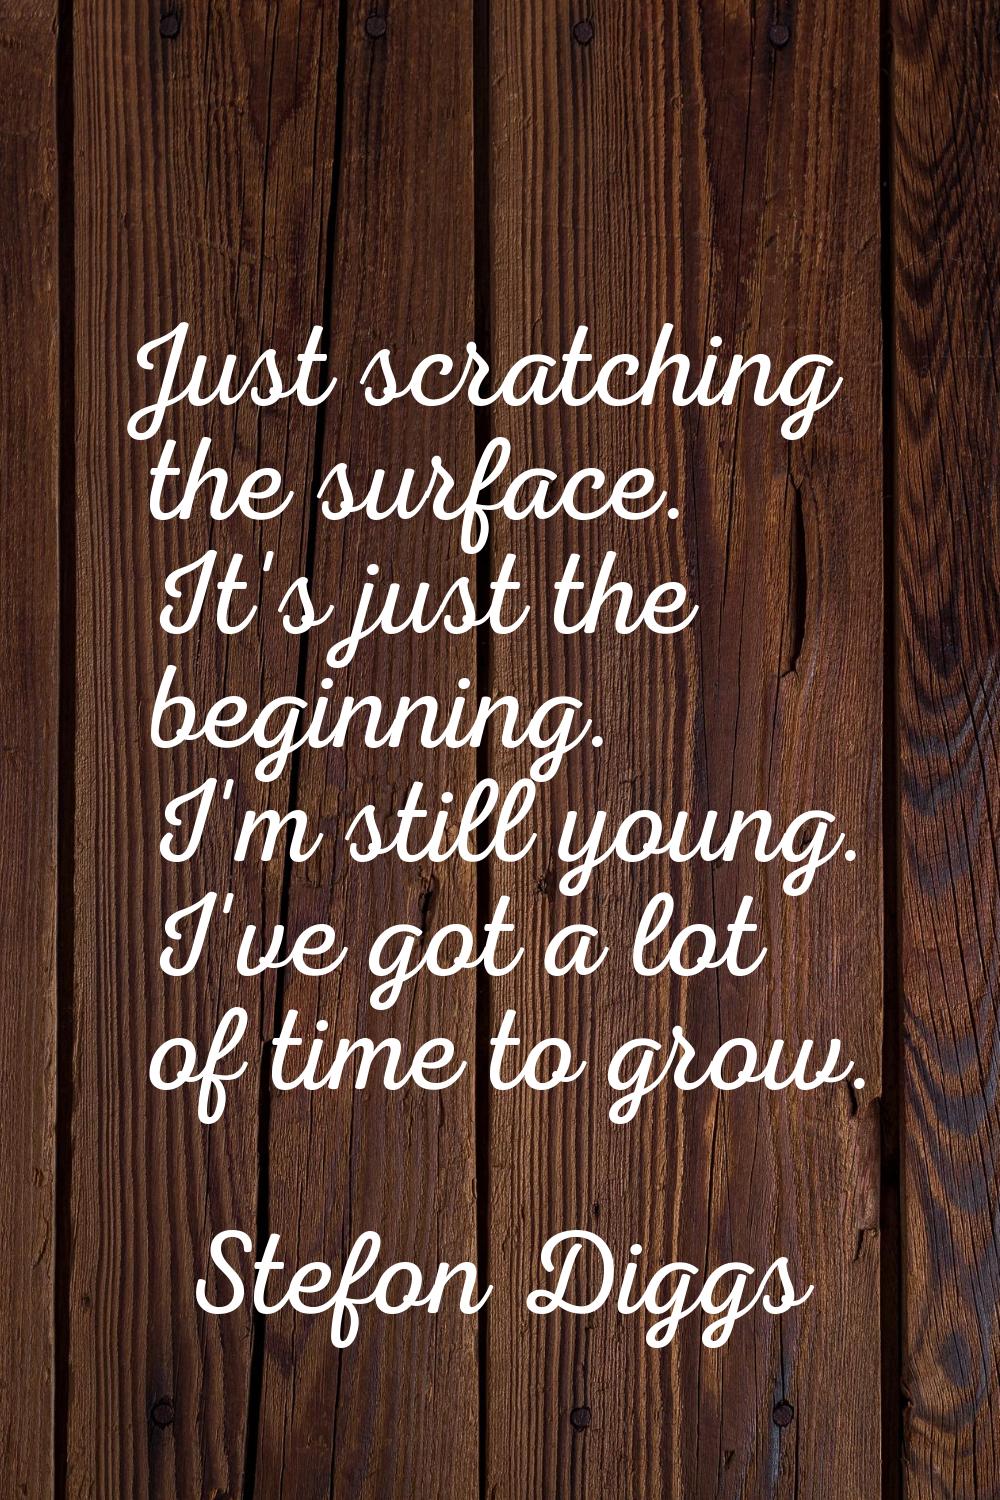 Just scratching the surface. It's just the beginning. I'm still young. I've got a lot of time to gr